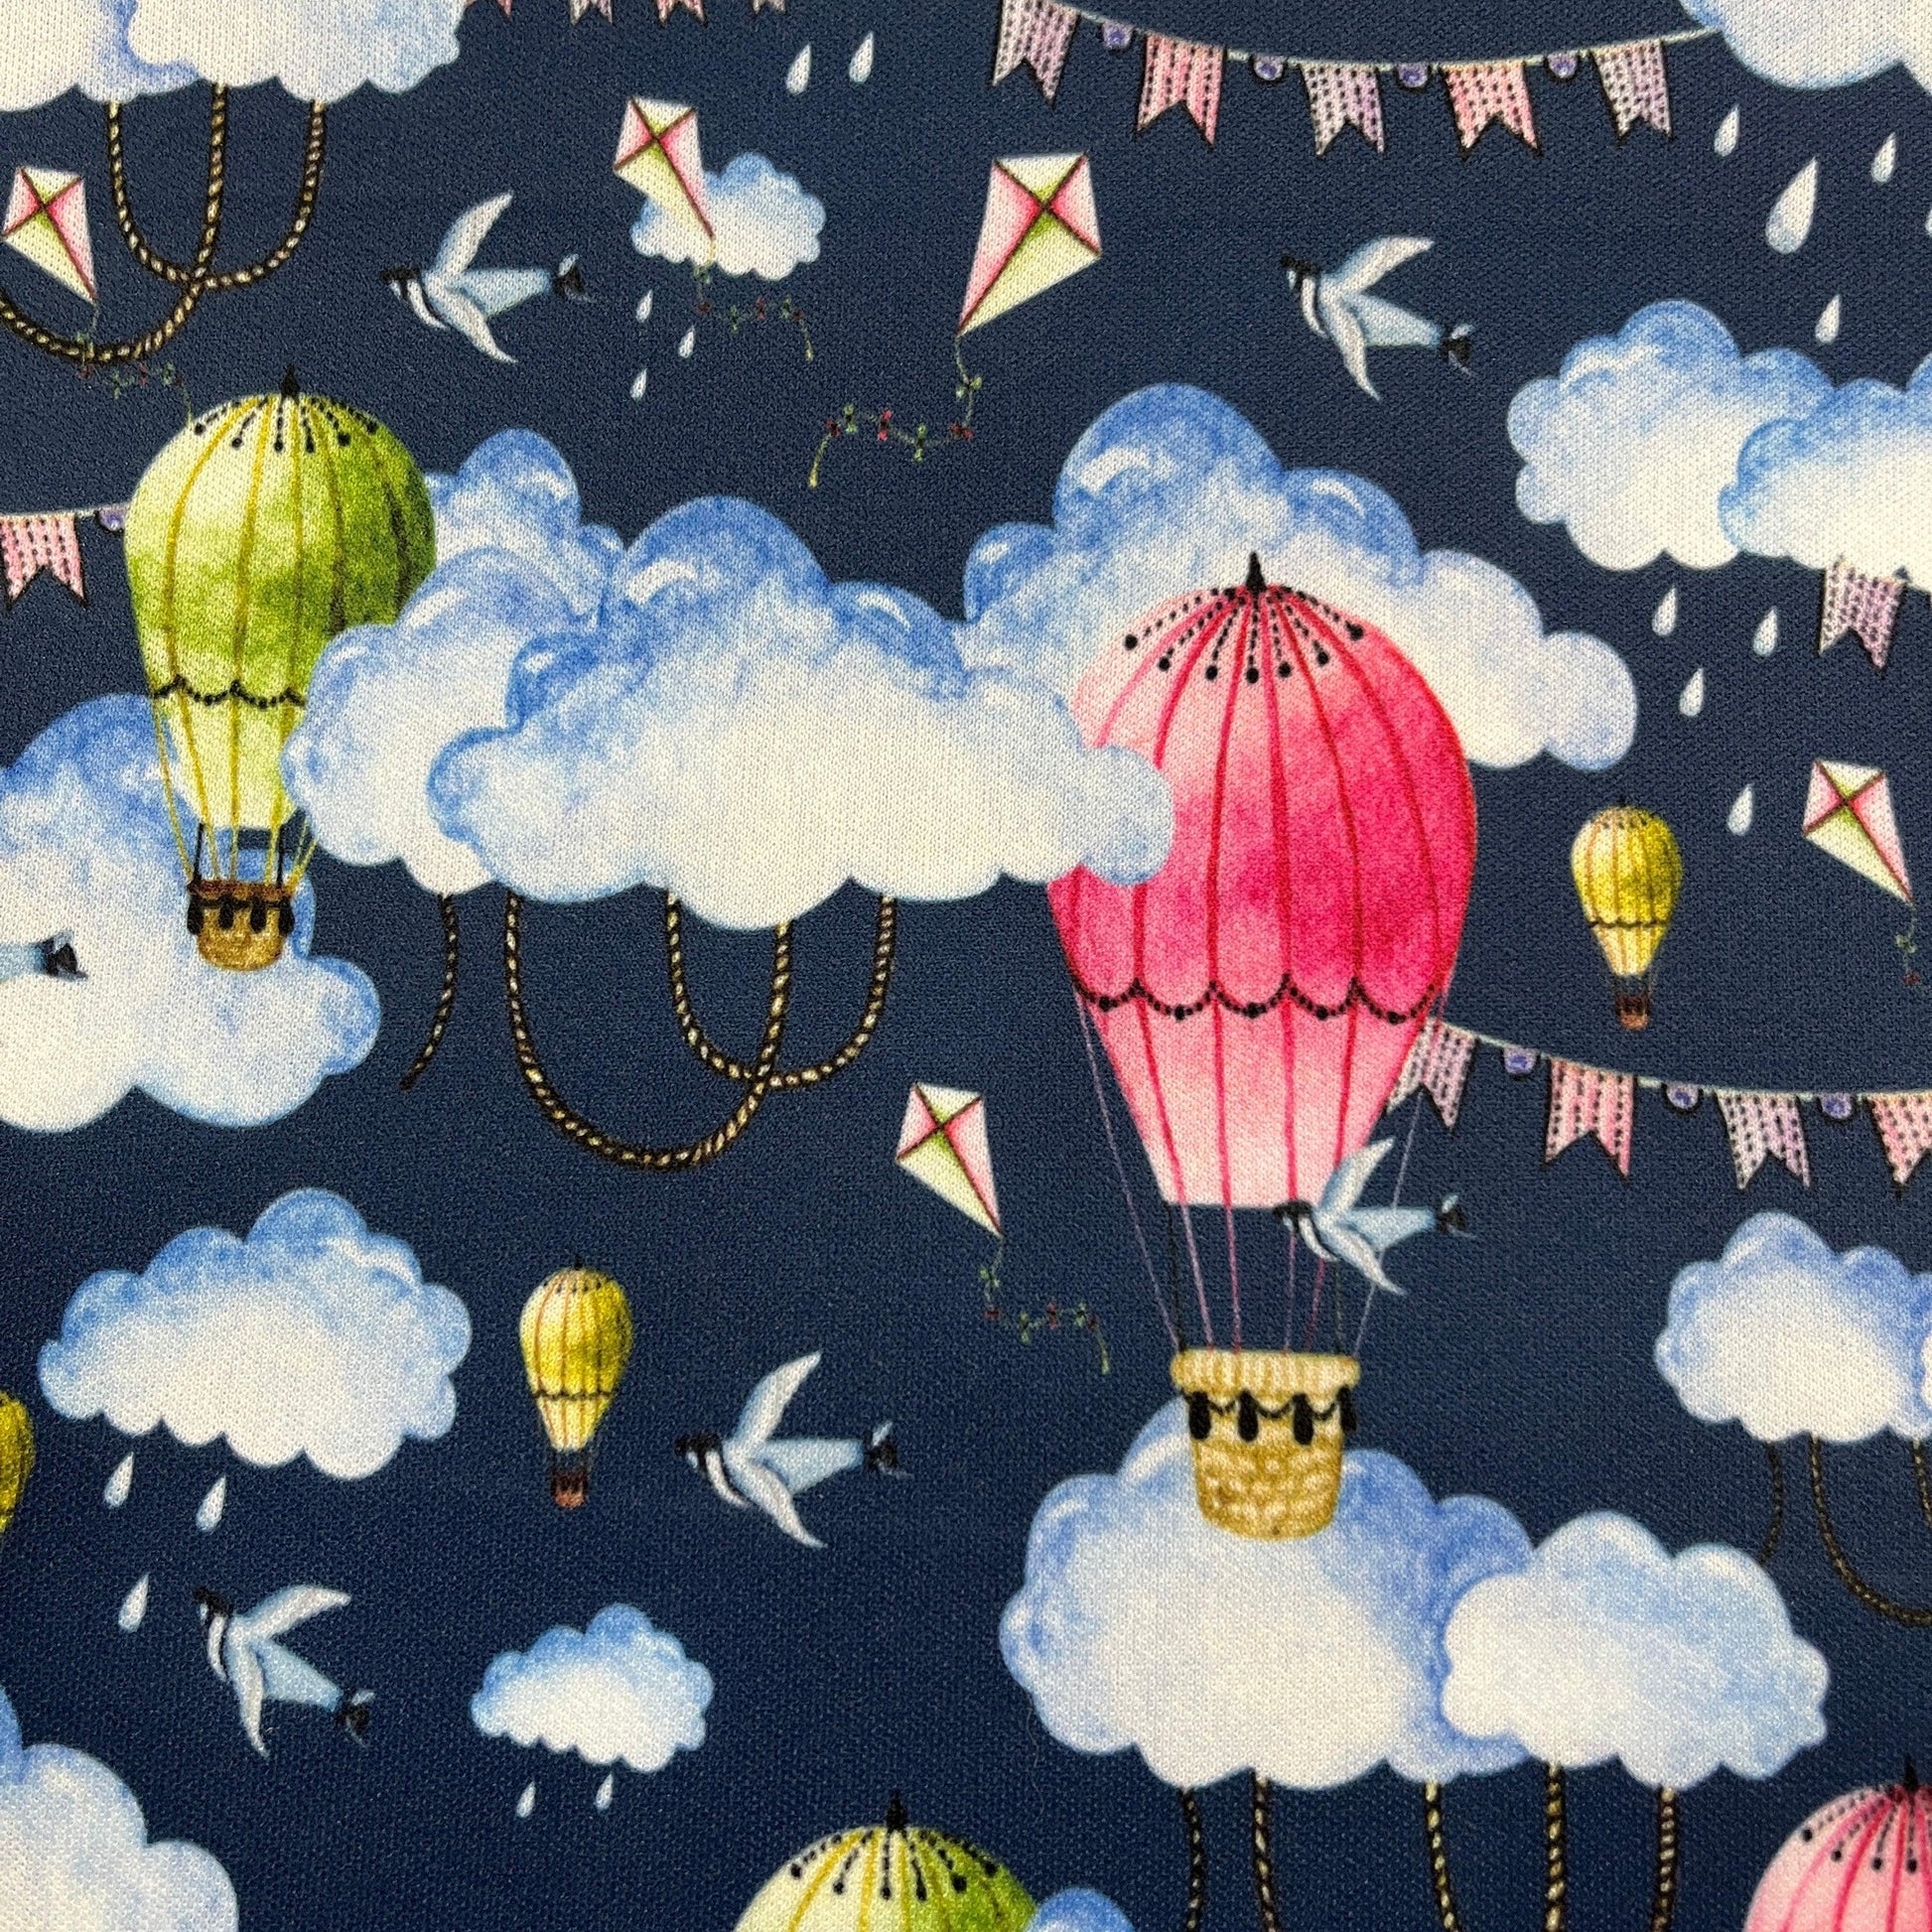 Hot Air Balloons on Navy 1 mil PUL Fabric - Made in the USA - Nature's Fabrics